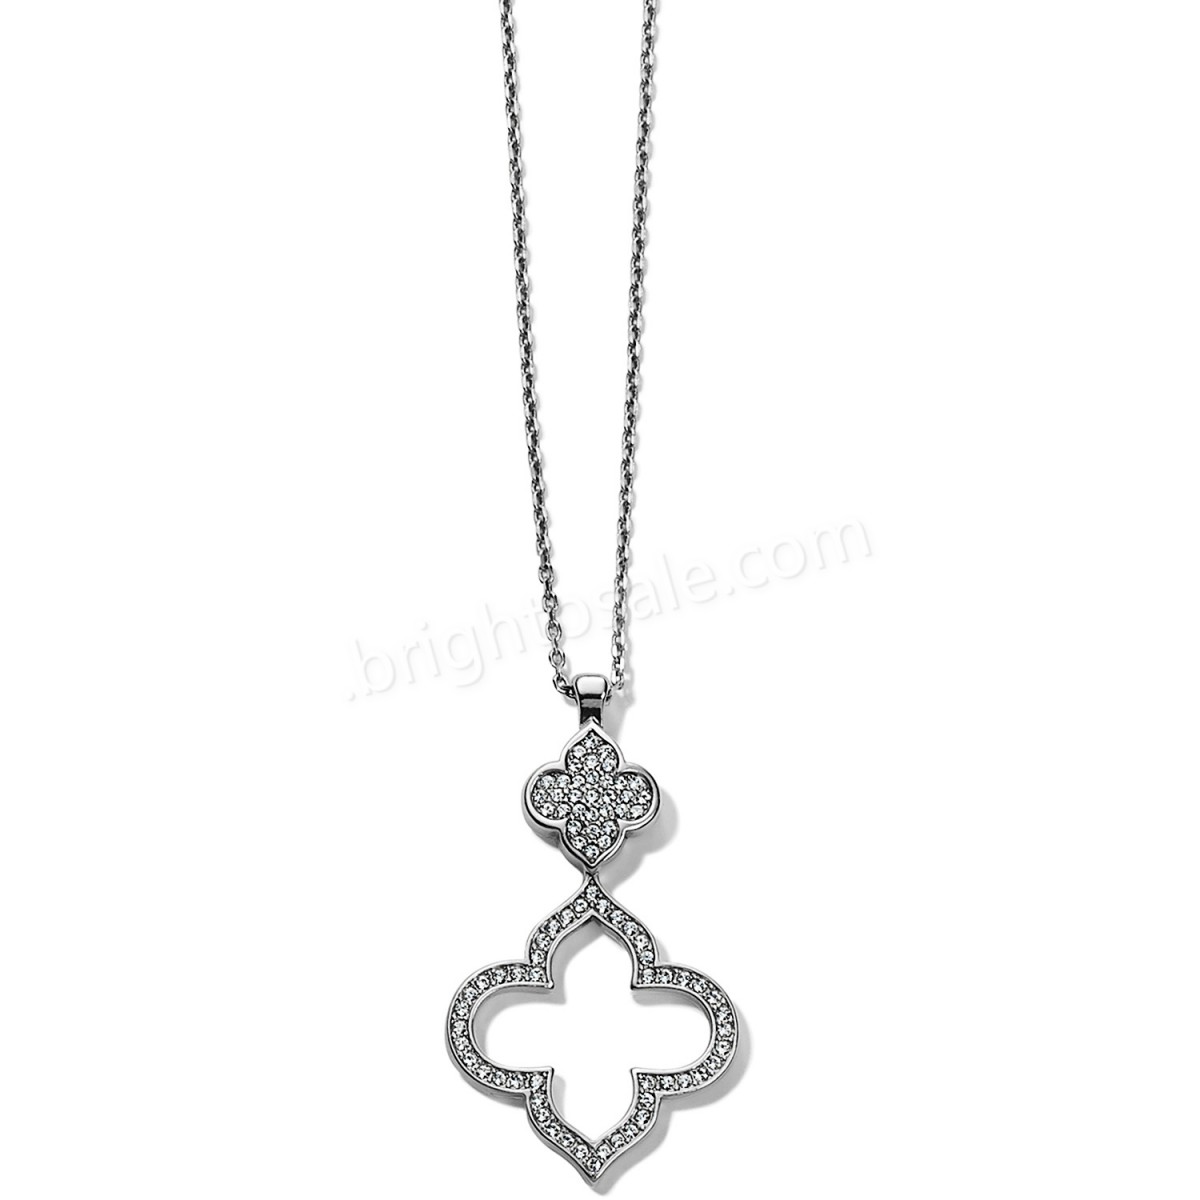 Brighton Collectibles & Online Discount The Way Cross Necklace - -0